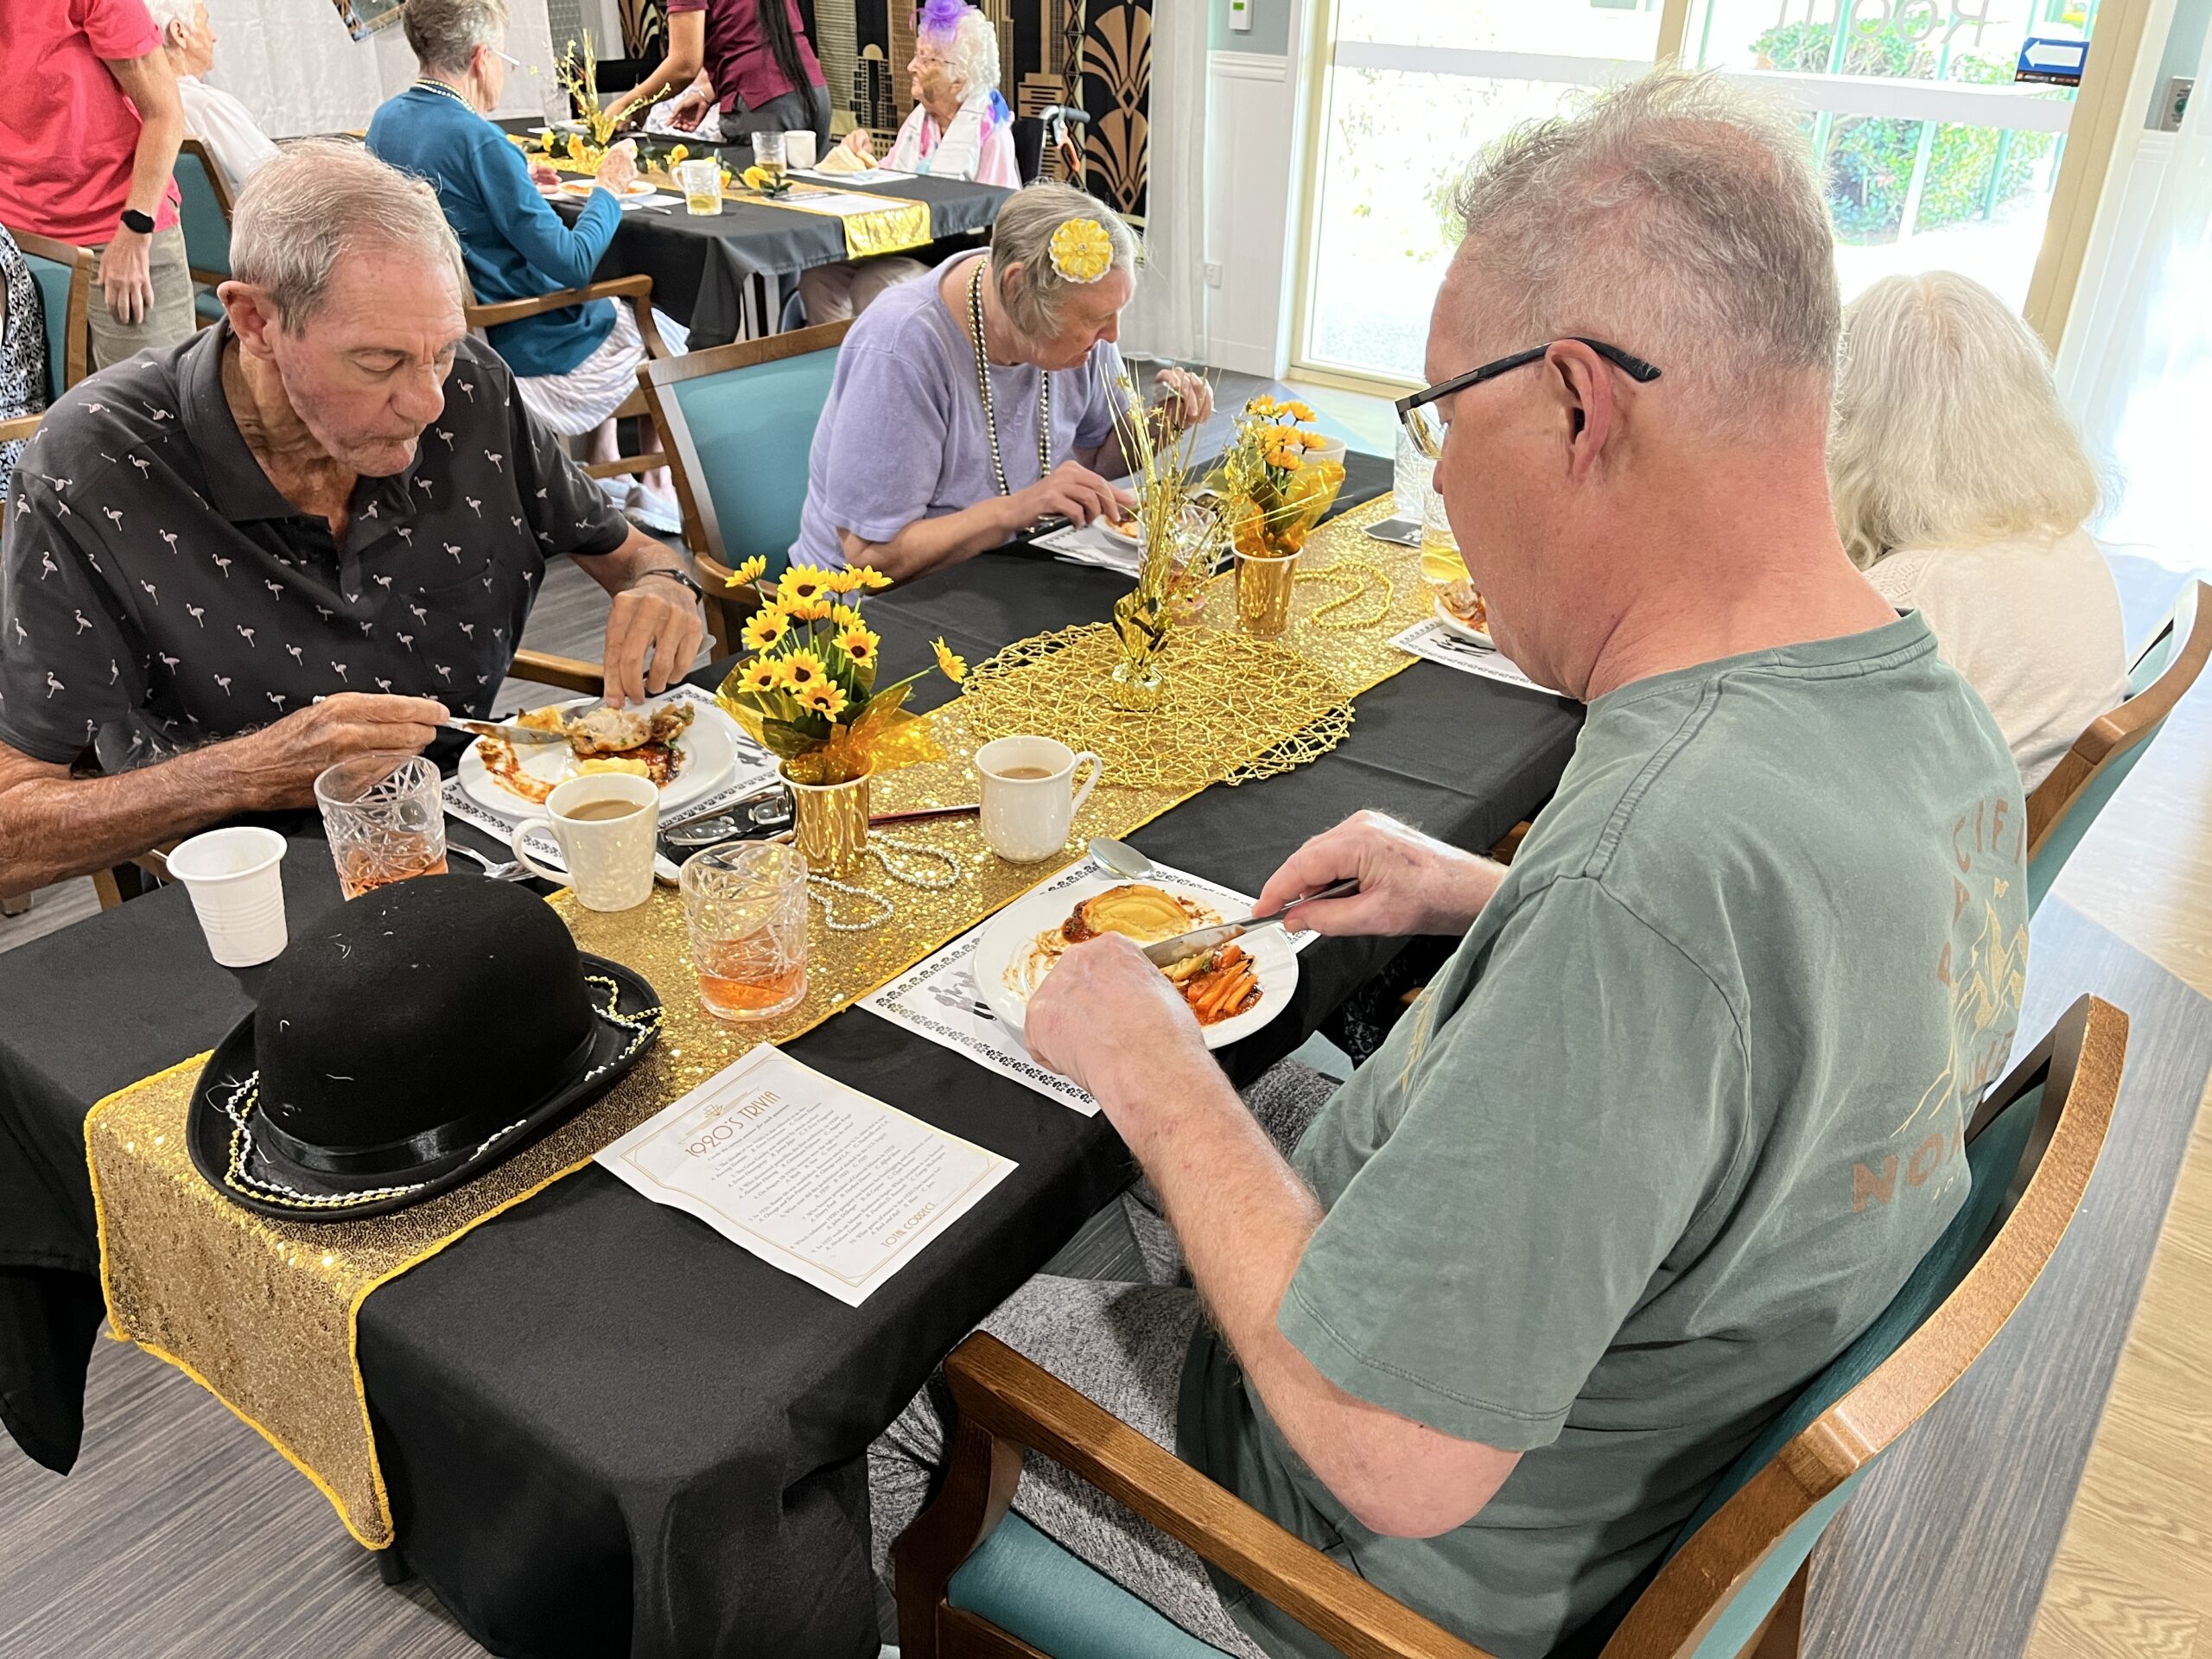 aged care residents have meals in the dining room